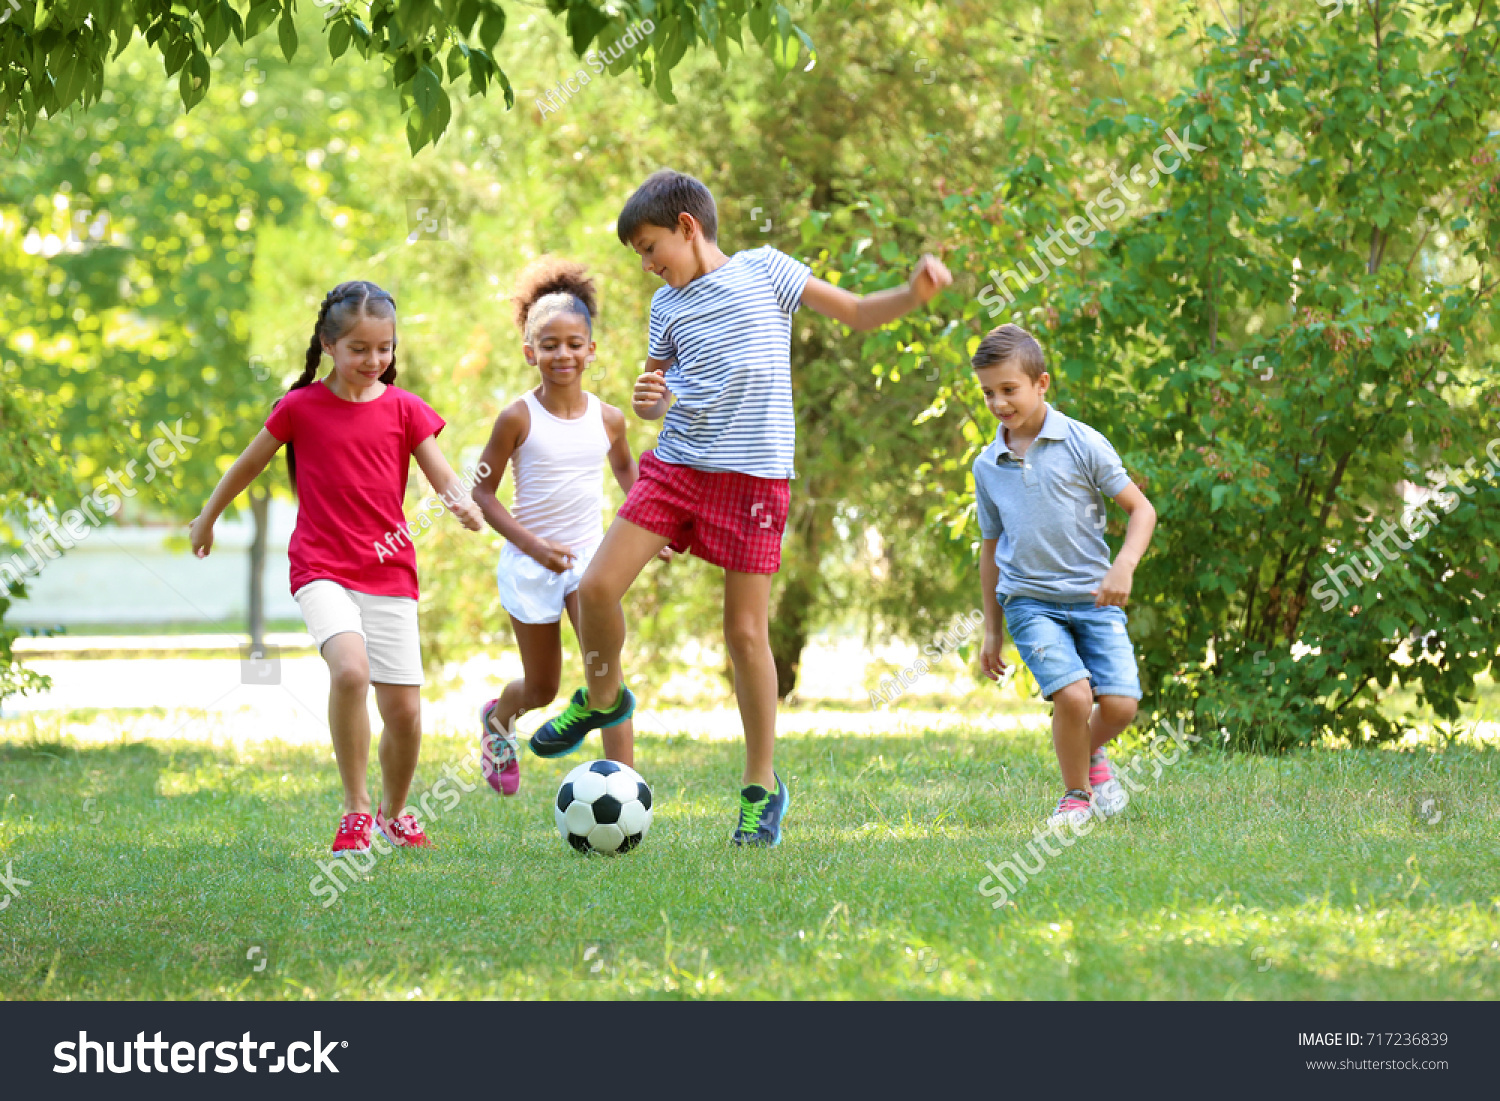 Cute children playing football in park #717236839